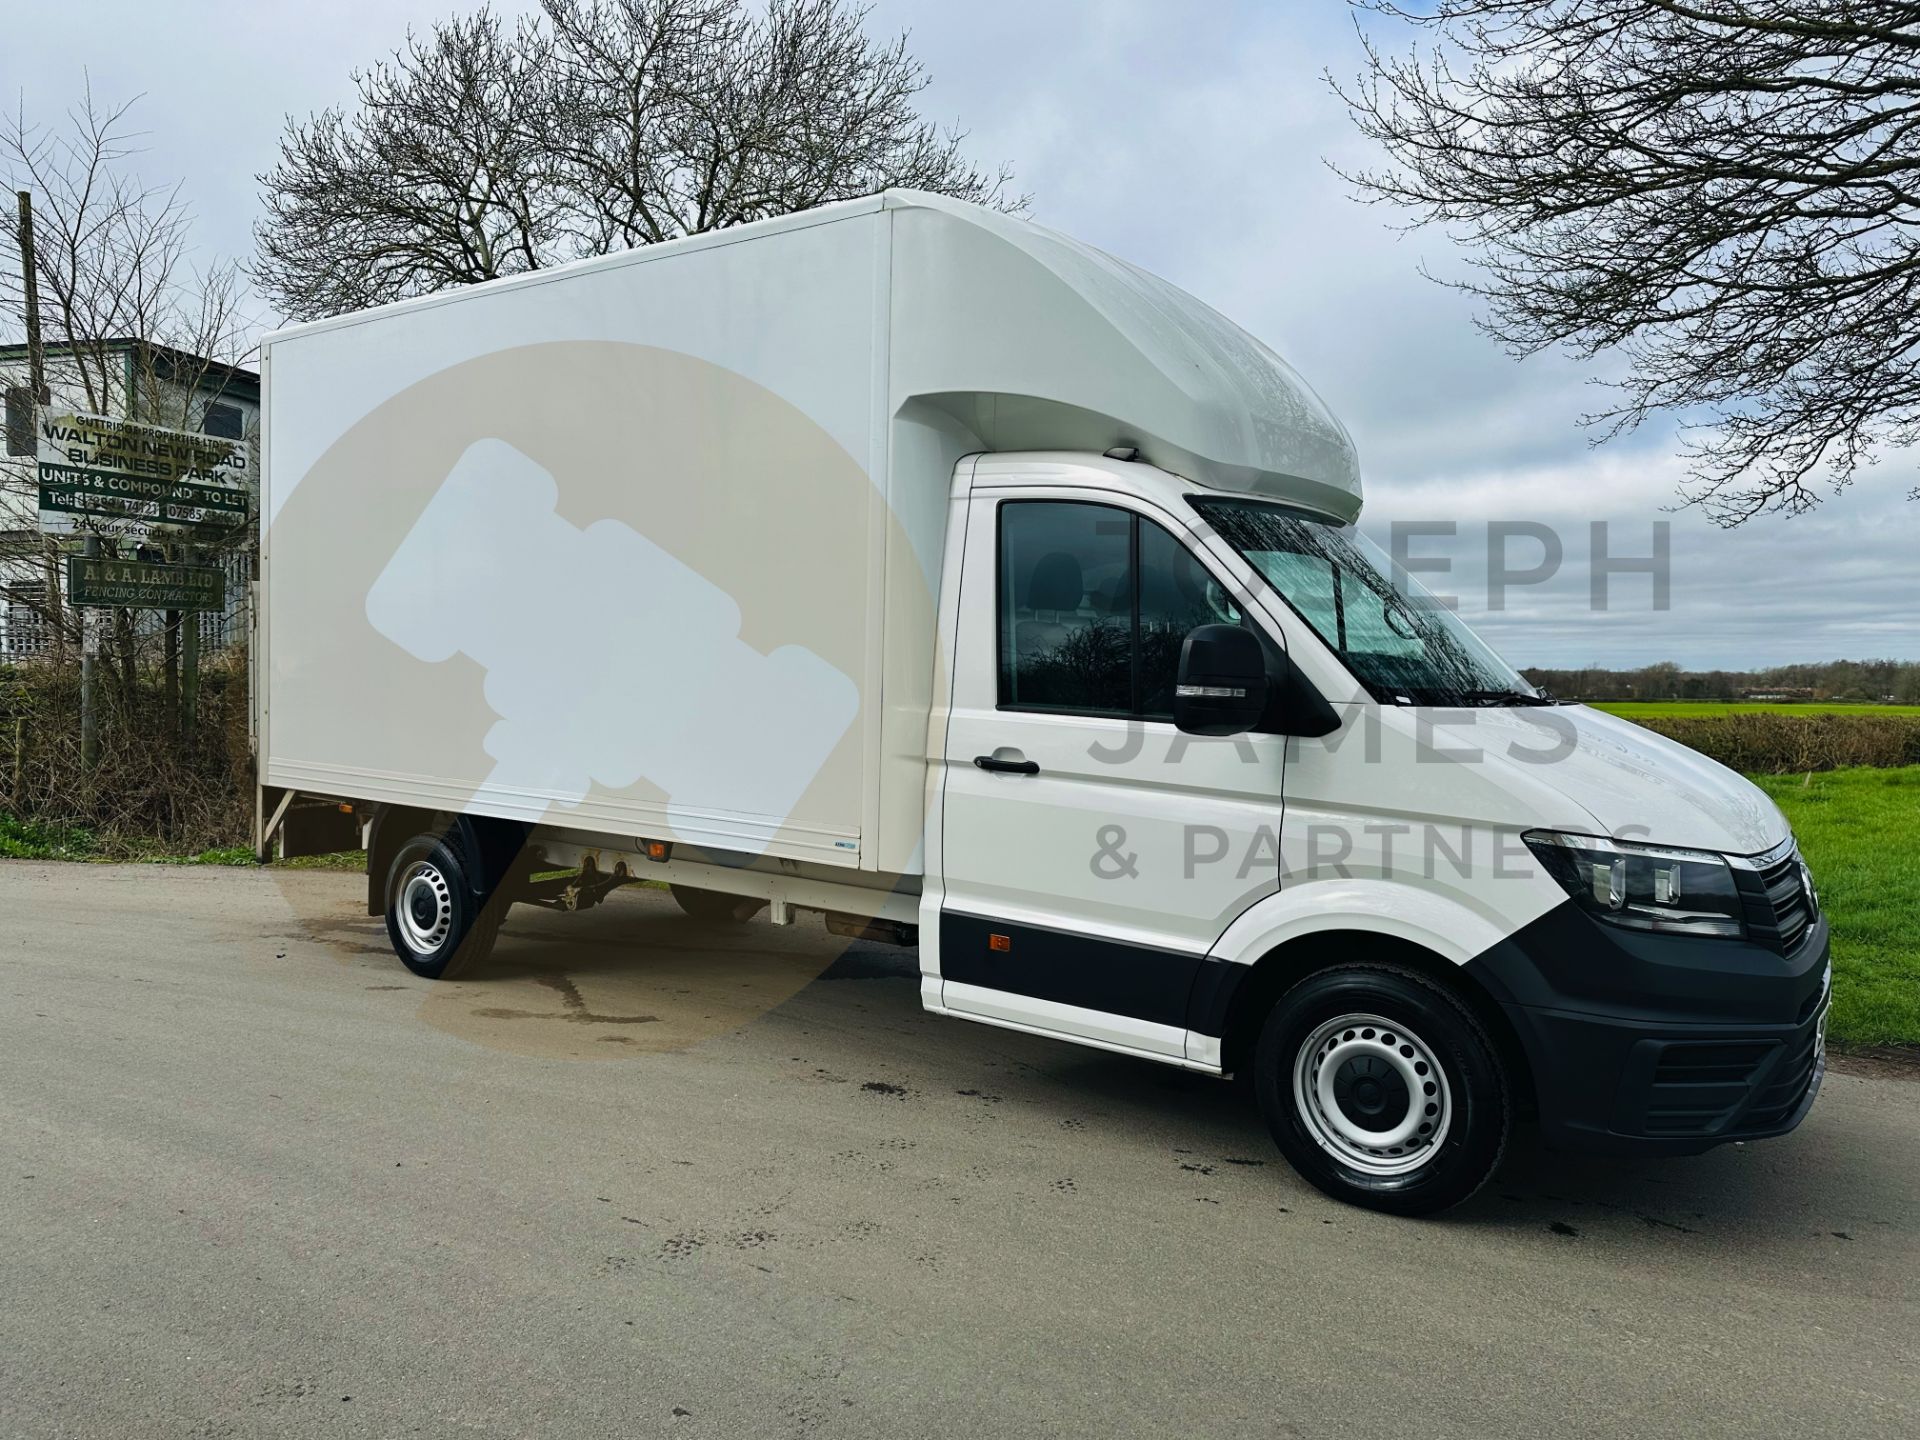 VOLKSWAGEN CRAFTER 2.0 TDI (140) LWB LUTON WITH TAIL LIFT (2021 MODEL) 1 OWNER - LOW MILES - AIR CON